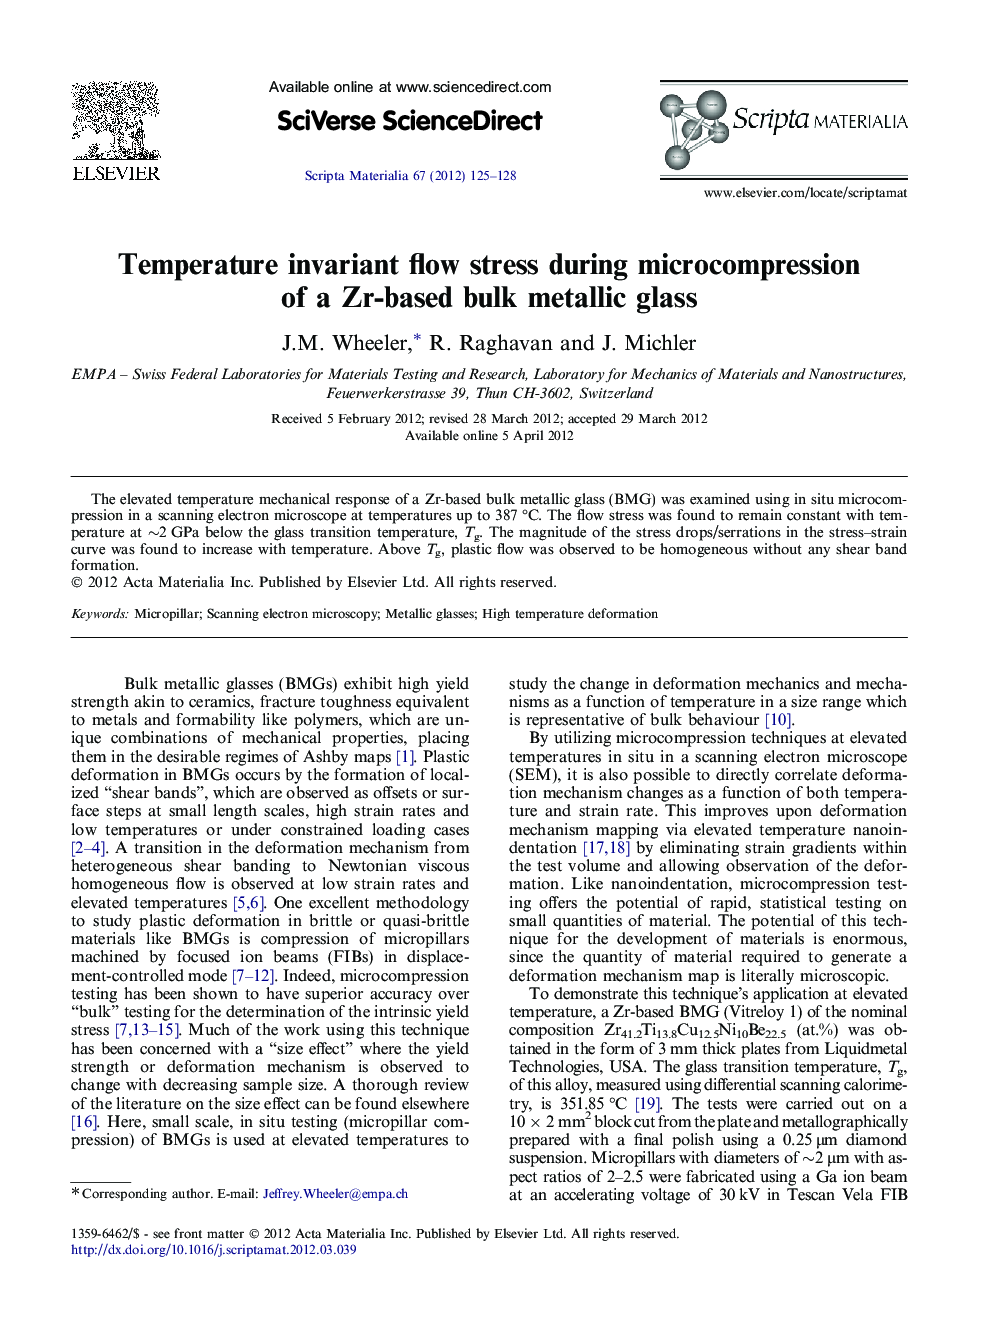 Temperature invariant flow stress during microcompression of a Zr-based bulk metallic glass